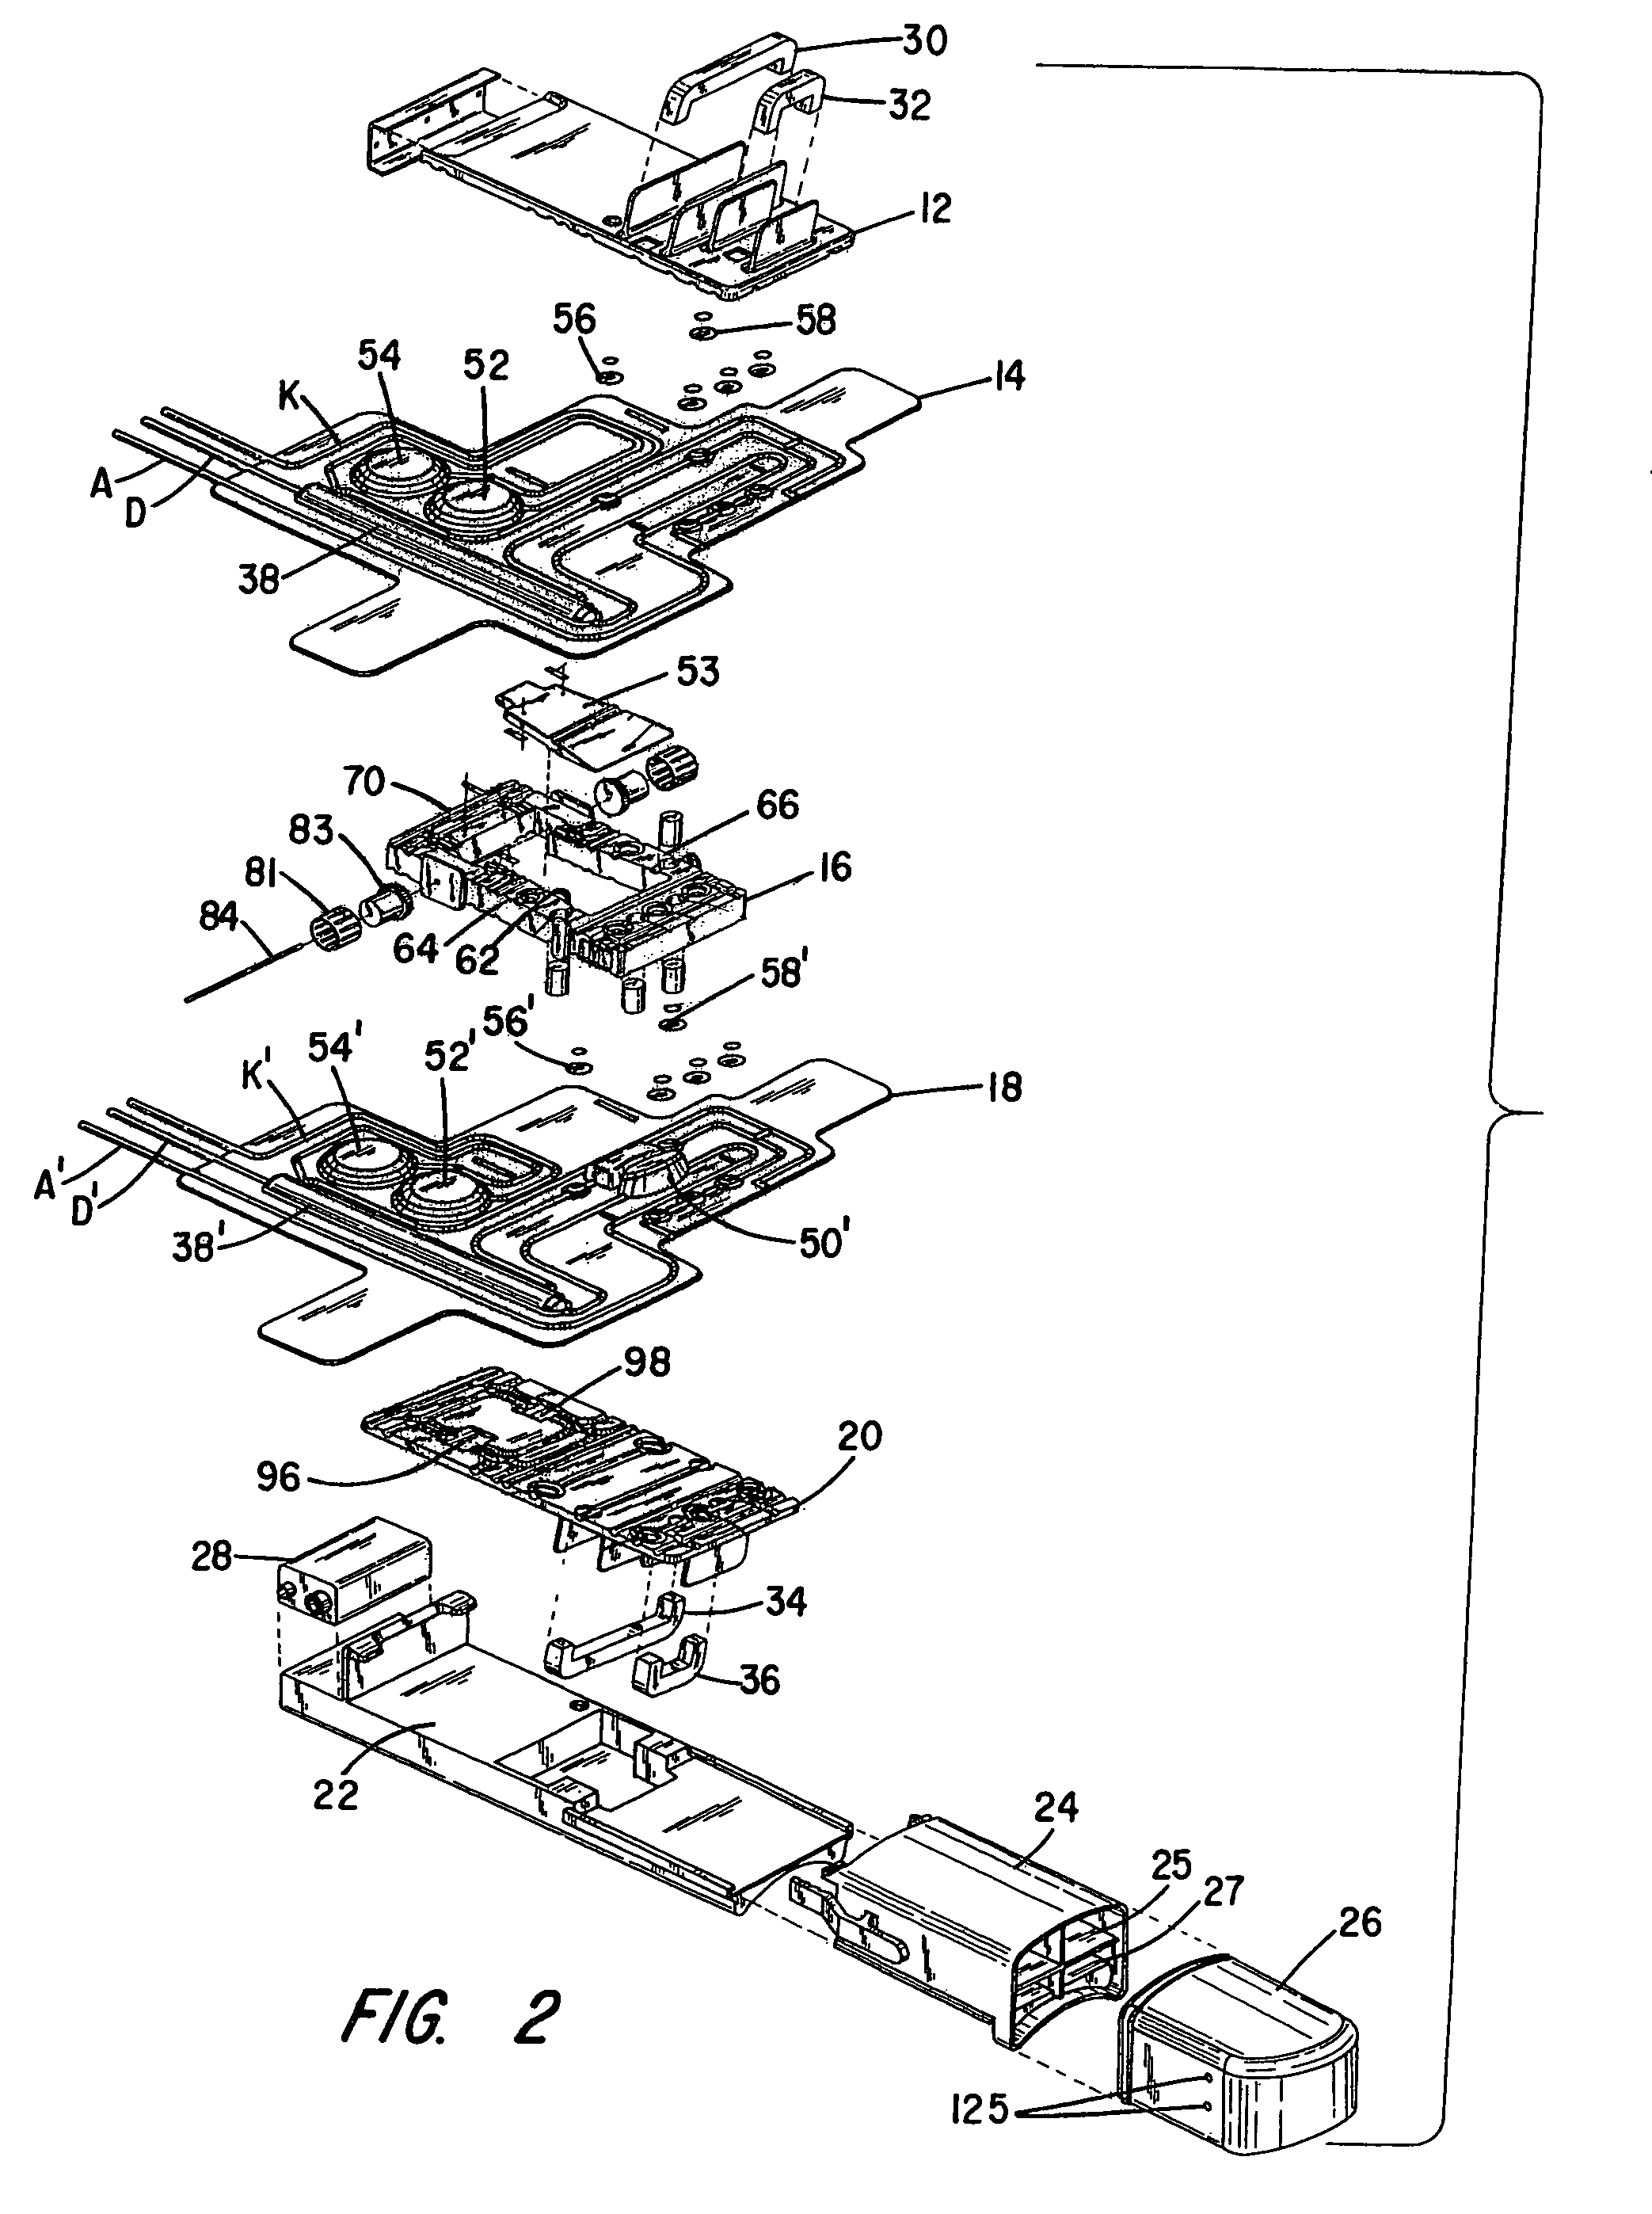 Chronic access system for extracorporeal treatment of blood including a continously wearable hemodialyzer